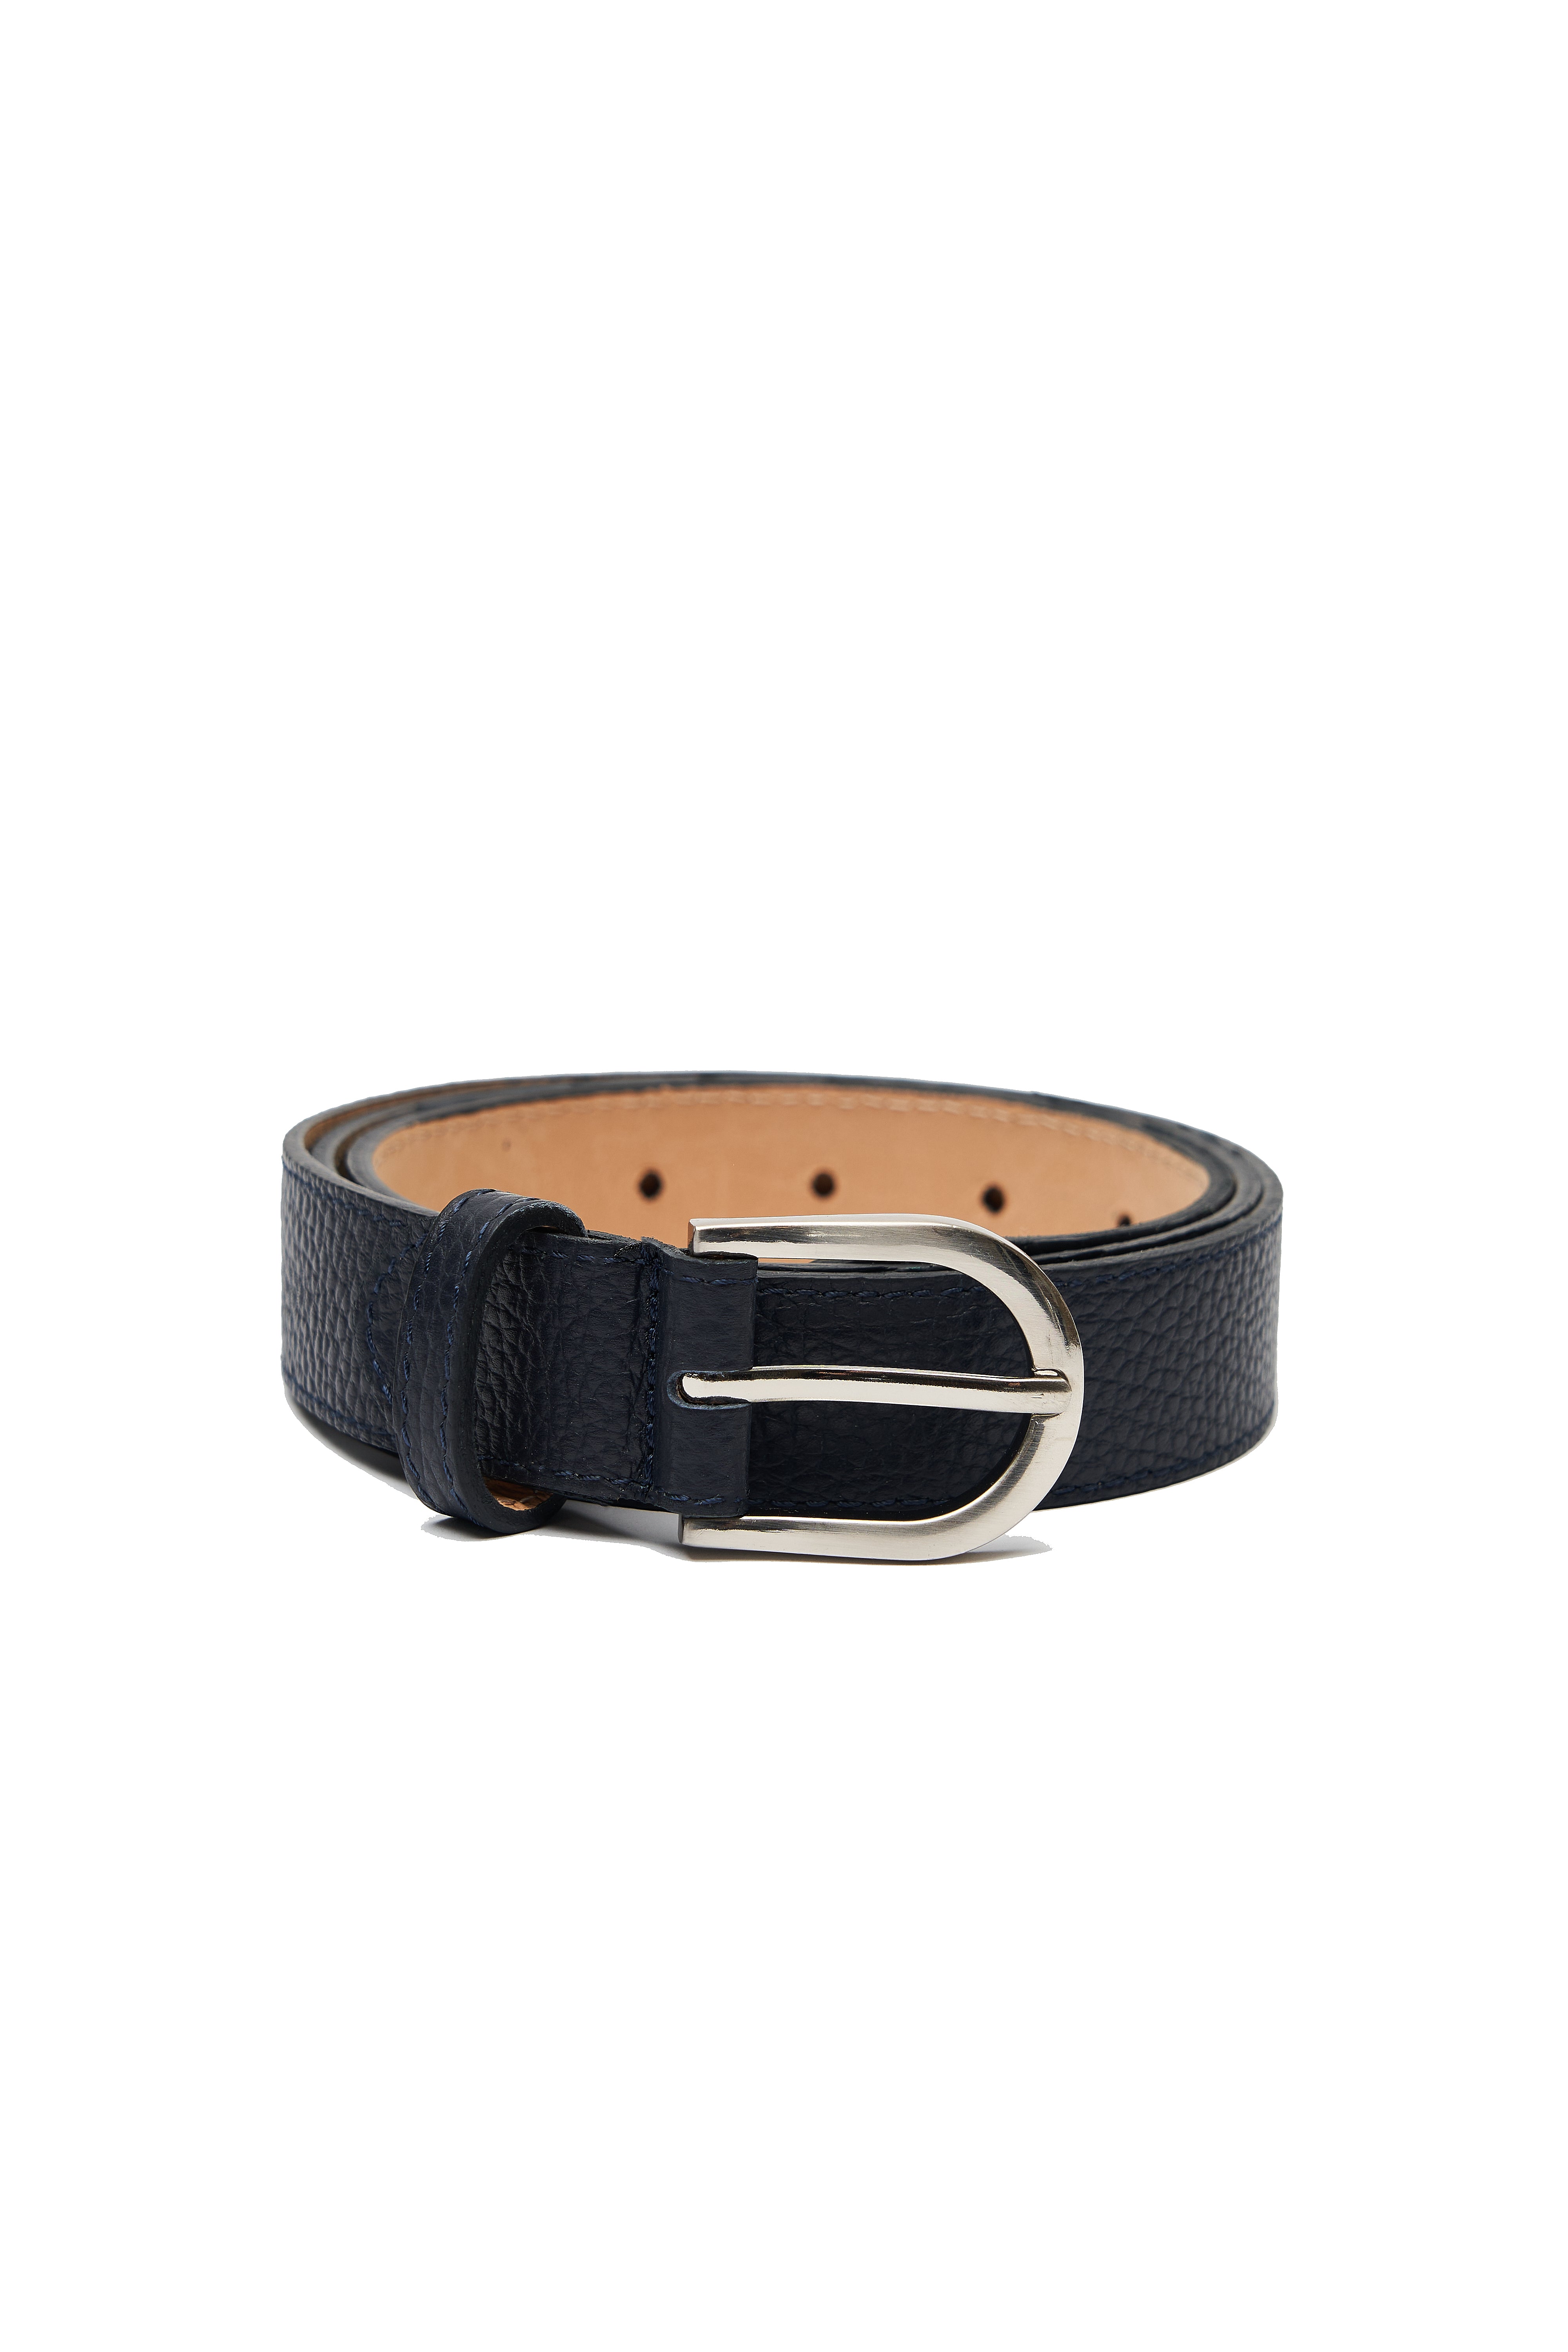 LEATHER BLUE BELT WITH SILVER DETAILS